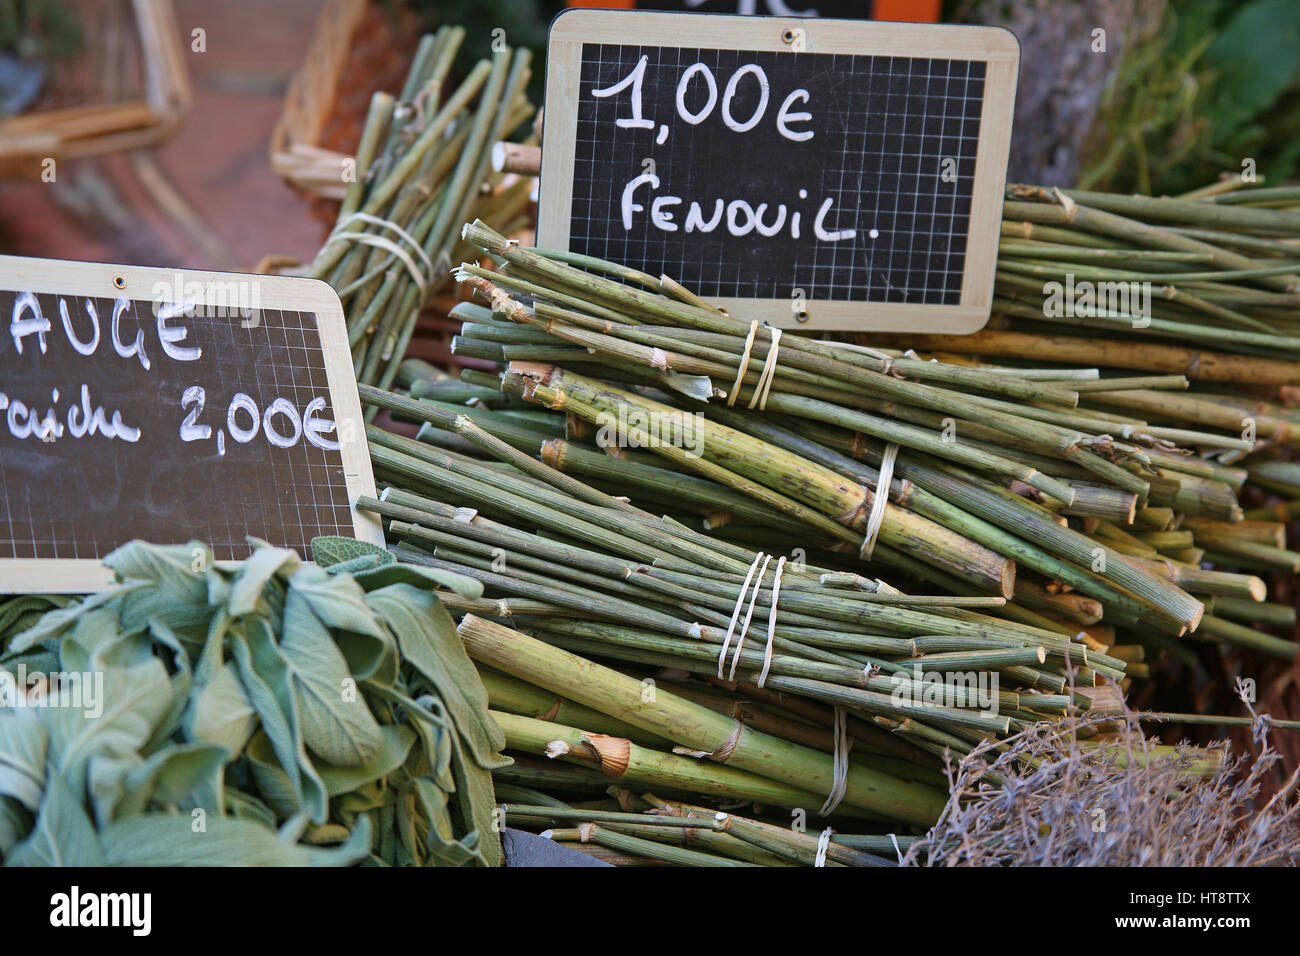 Fresh herbs on sale in Provencal market, France Stock Photo